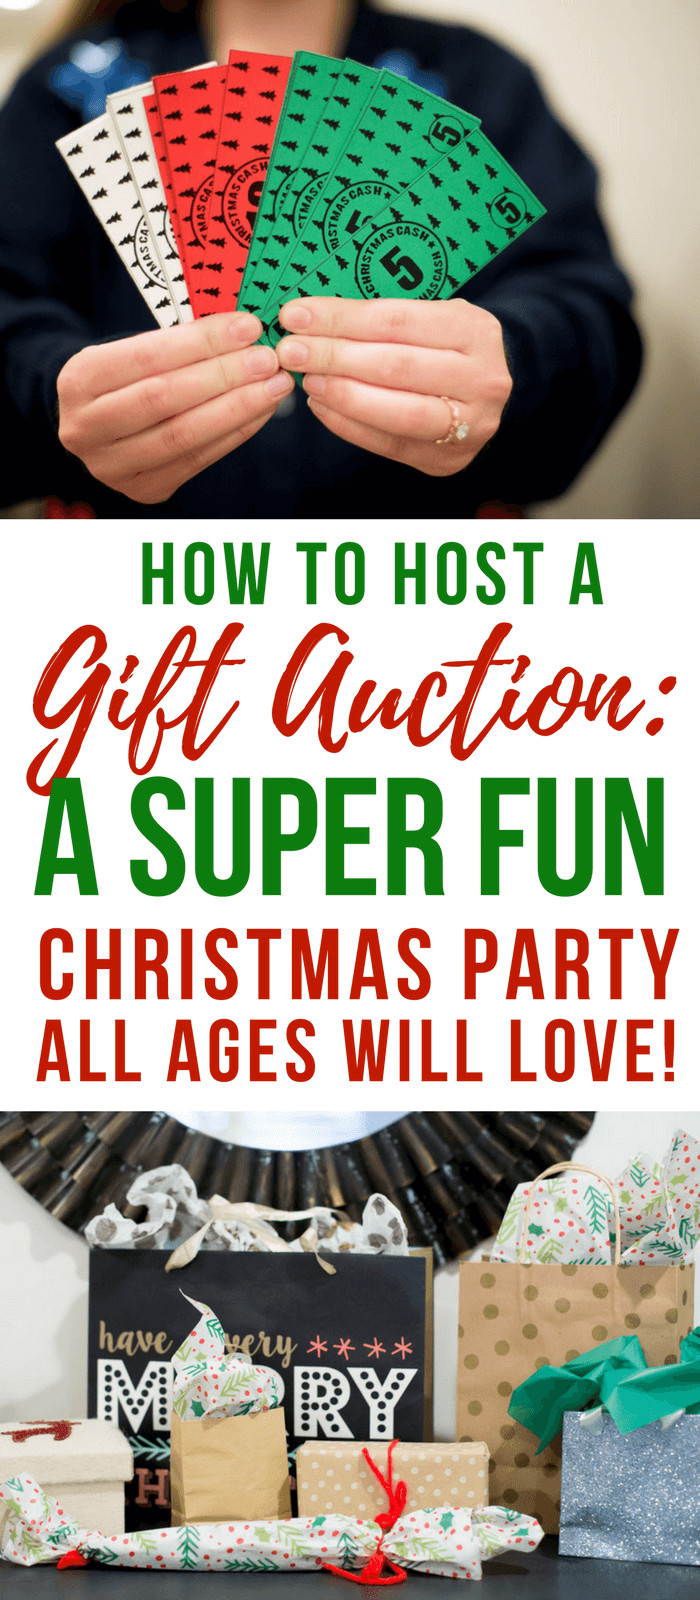 Corporate Holiday Party Game Ideas
 Hilarious White Elephant Gift Auction Christmas Party